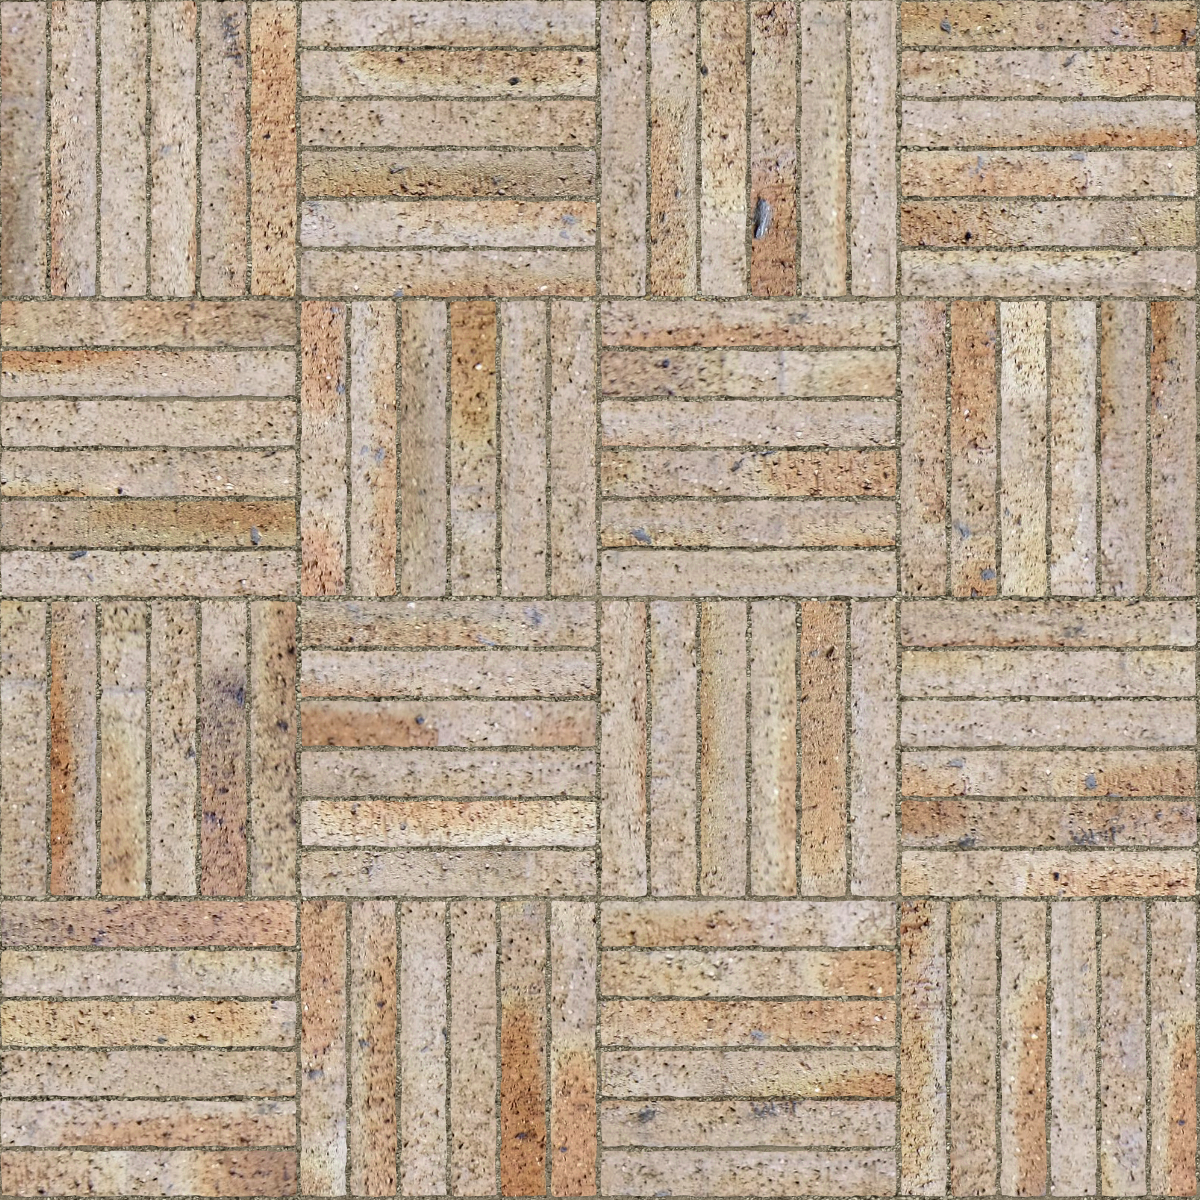 A seamless brick texture with dragfaced brick units arranged in a Basketweave pattern